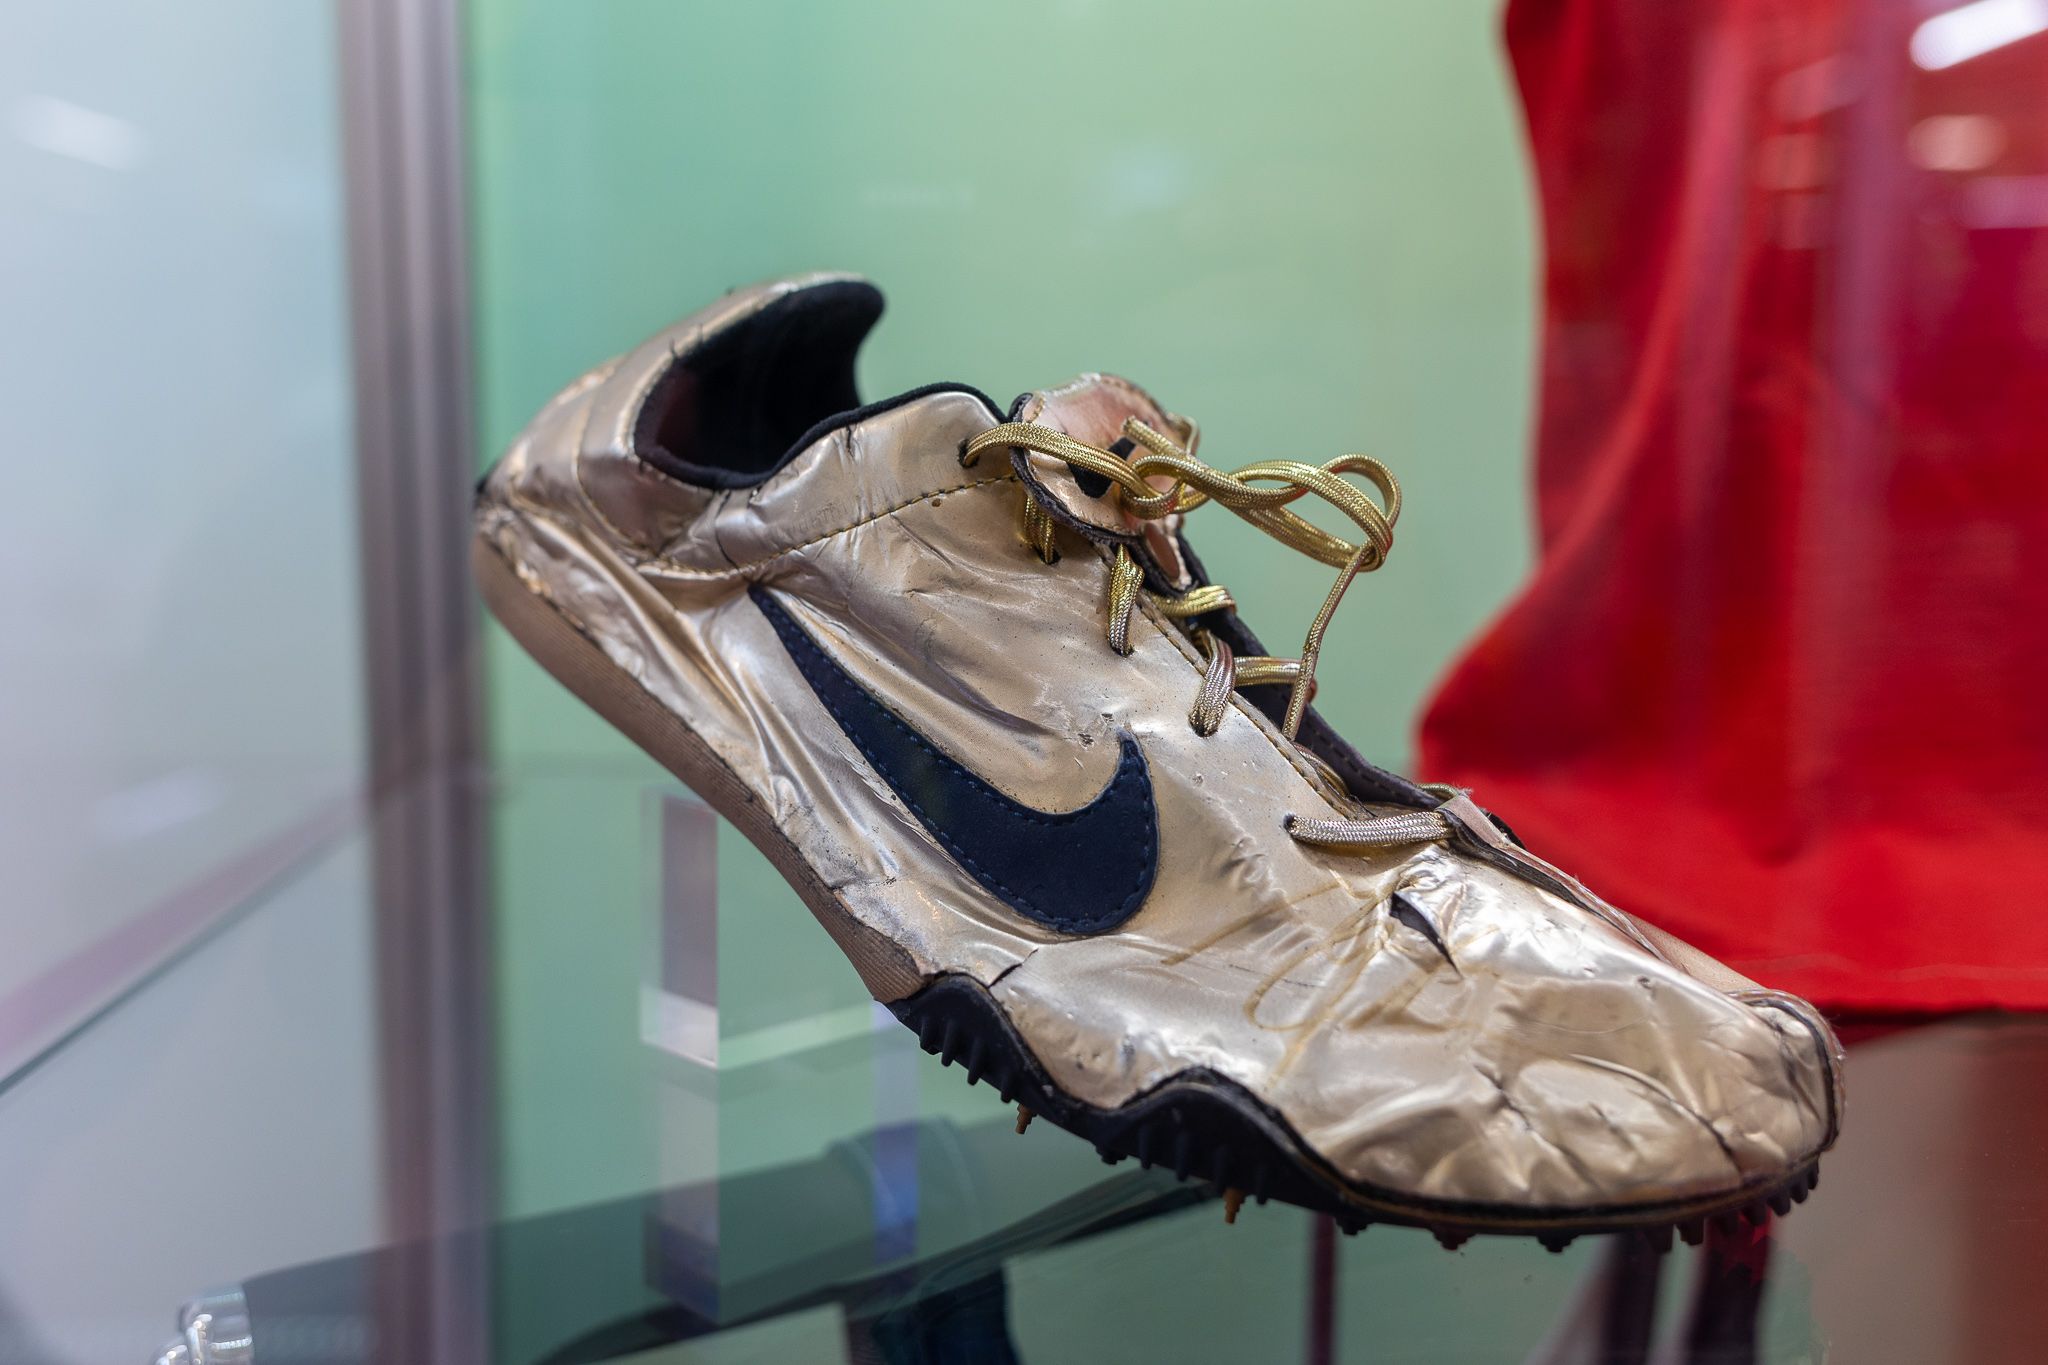 One of Michael Johnson's iconic golden spikes on display in MOWA